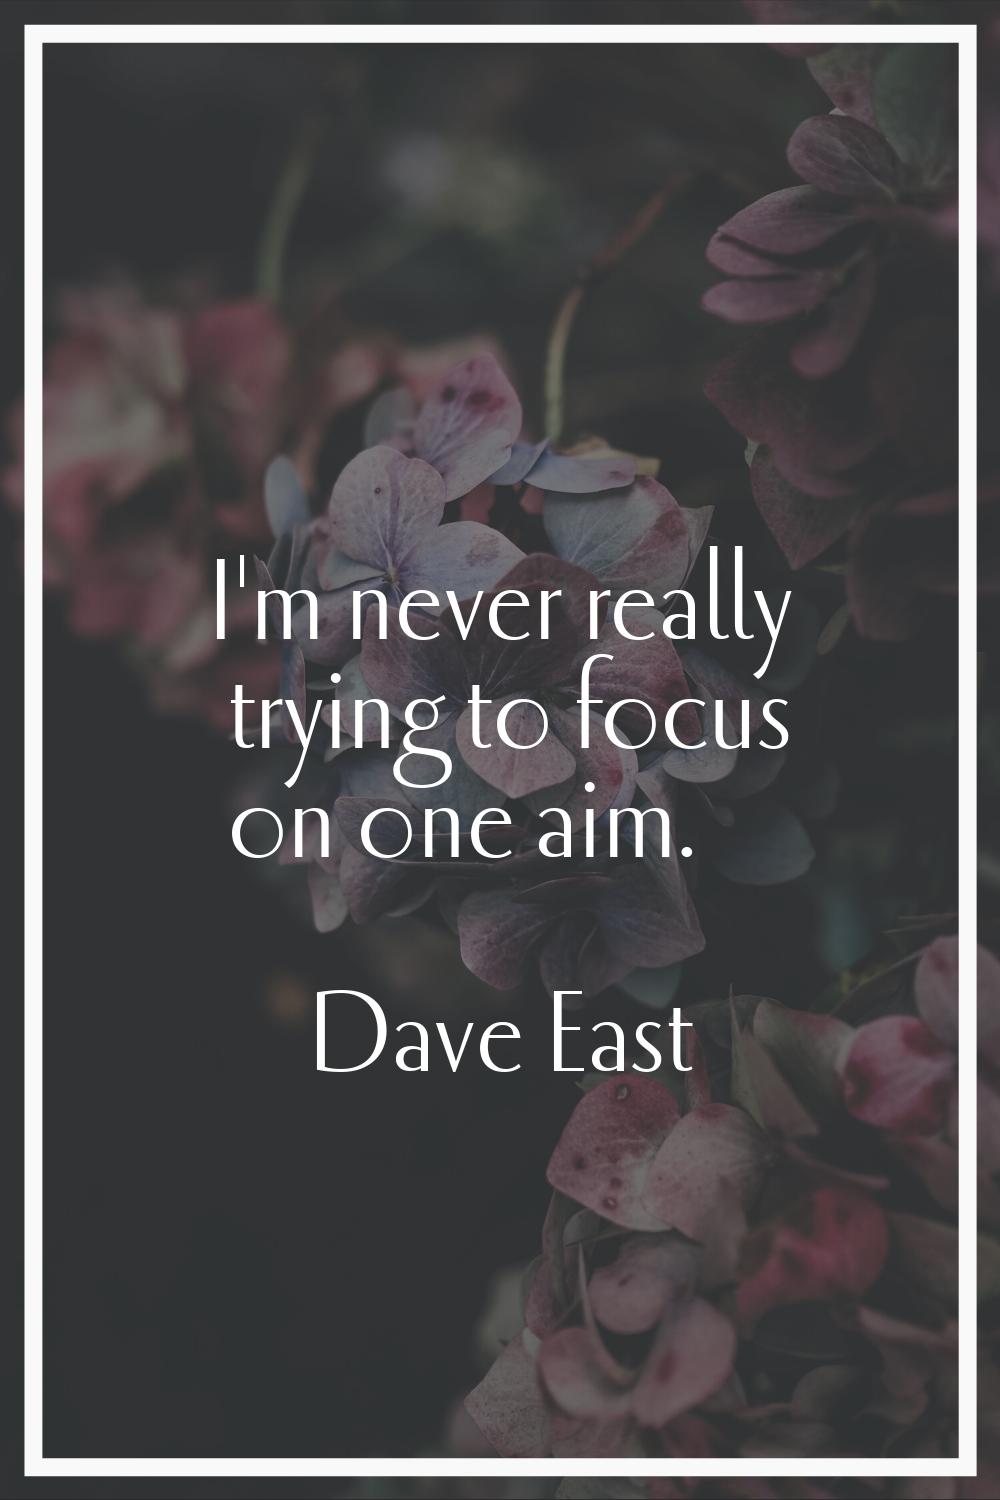 I'm never really trying to focus on one aim.